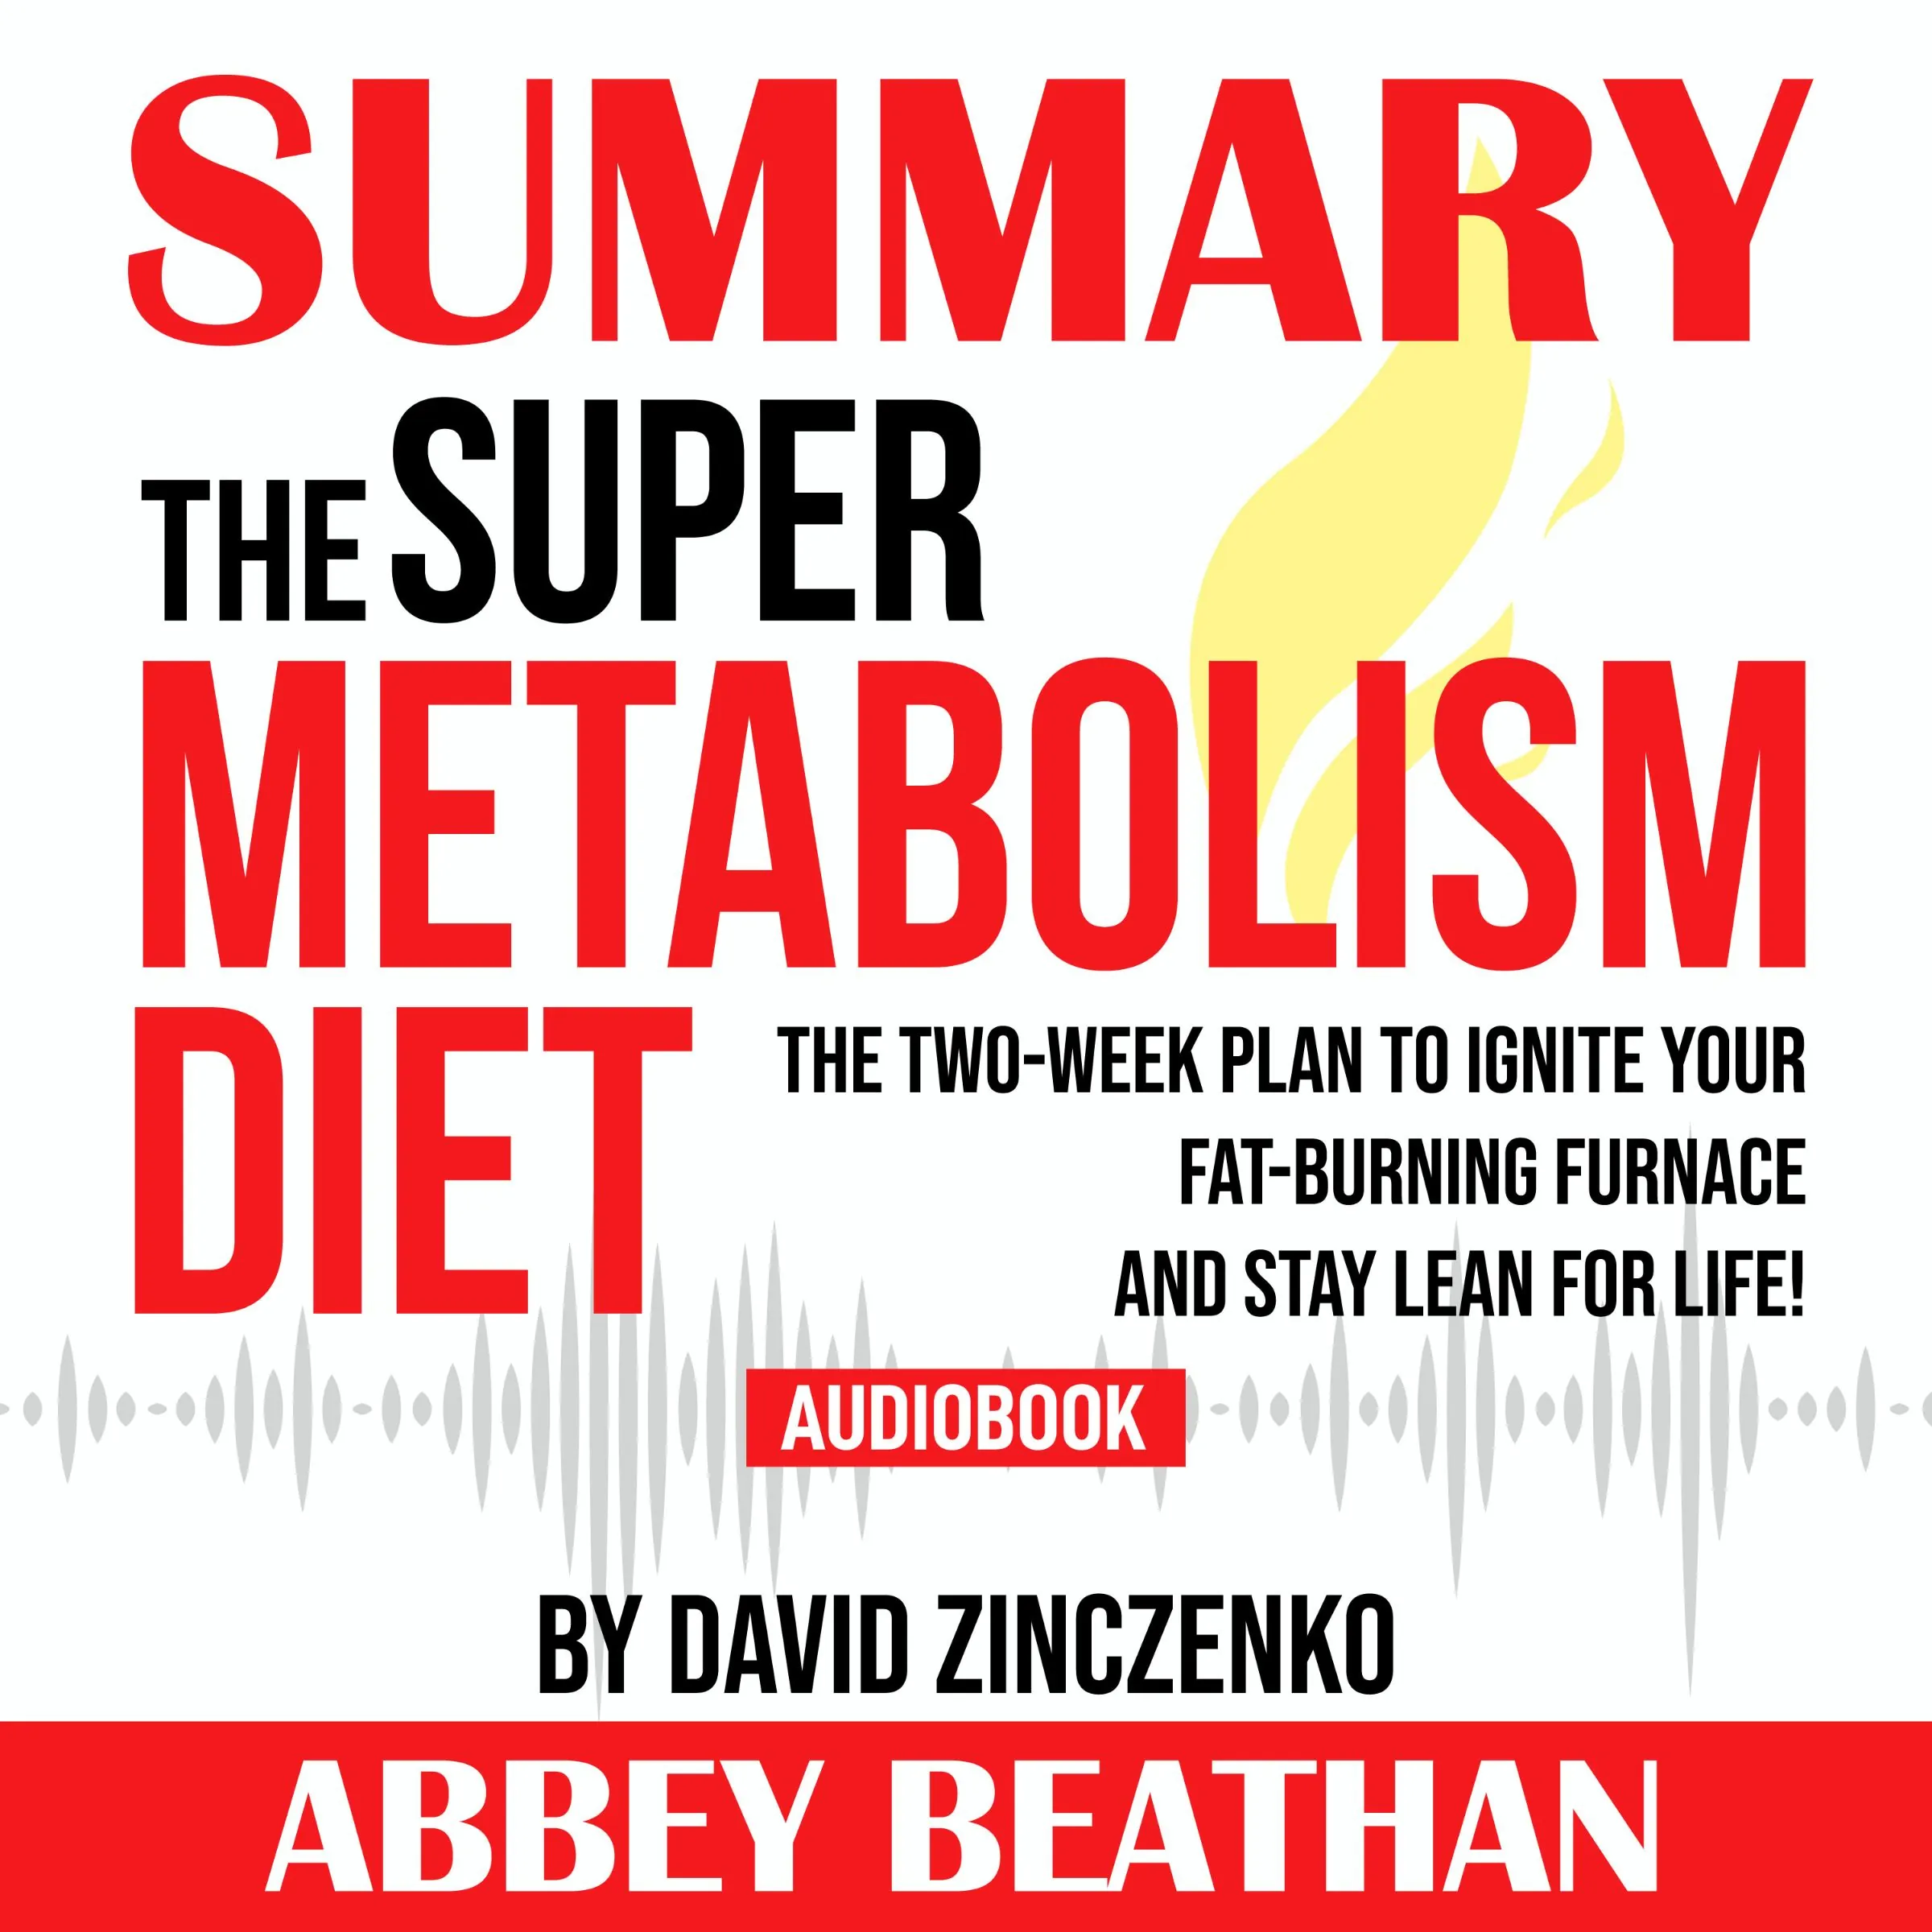 Summary of The Super Metabolism Diet: The Two-Week Plan to Ignite Your Fat-Burning Furnace and Stay Lean for Life! by David Zinczenko Audiobook by Abbey Beathan